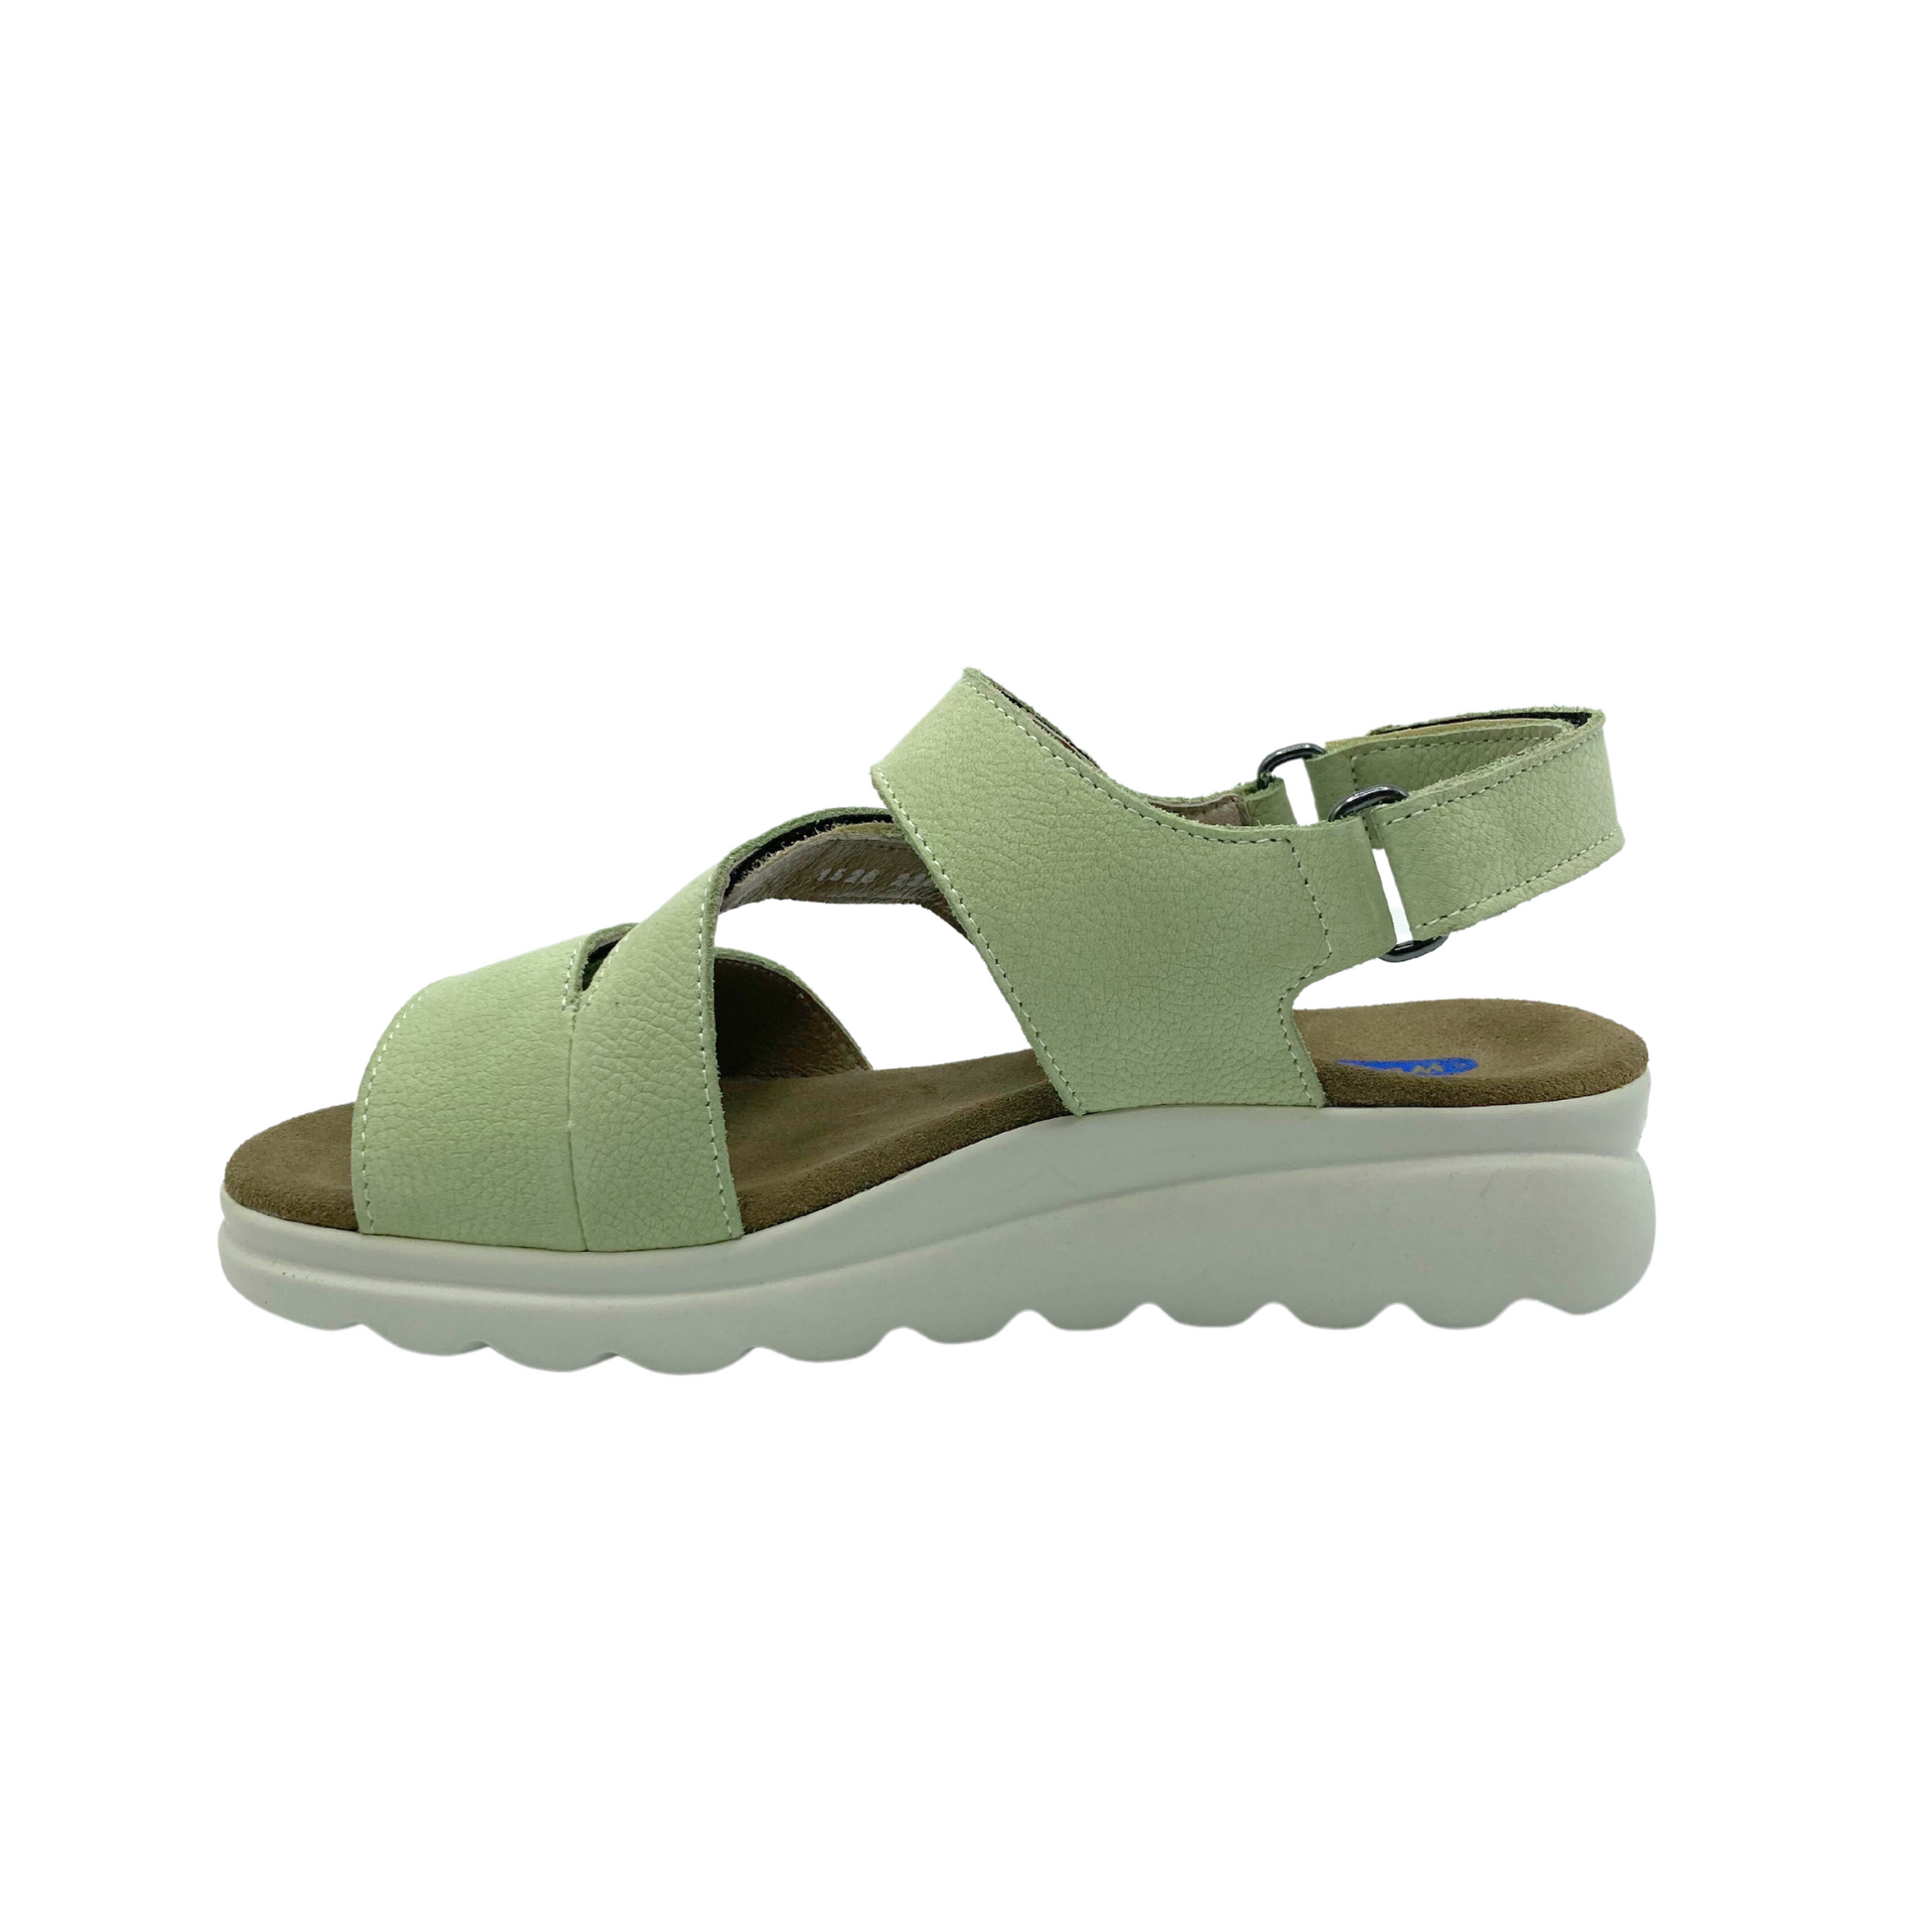 Inside view of a light green leather sandal with a natural color footbed and contrasting whtie outsole.  Slight wedge